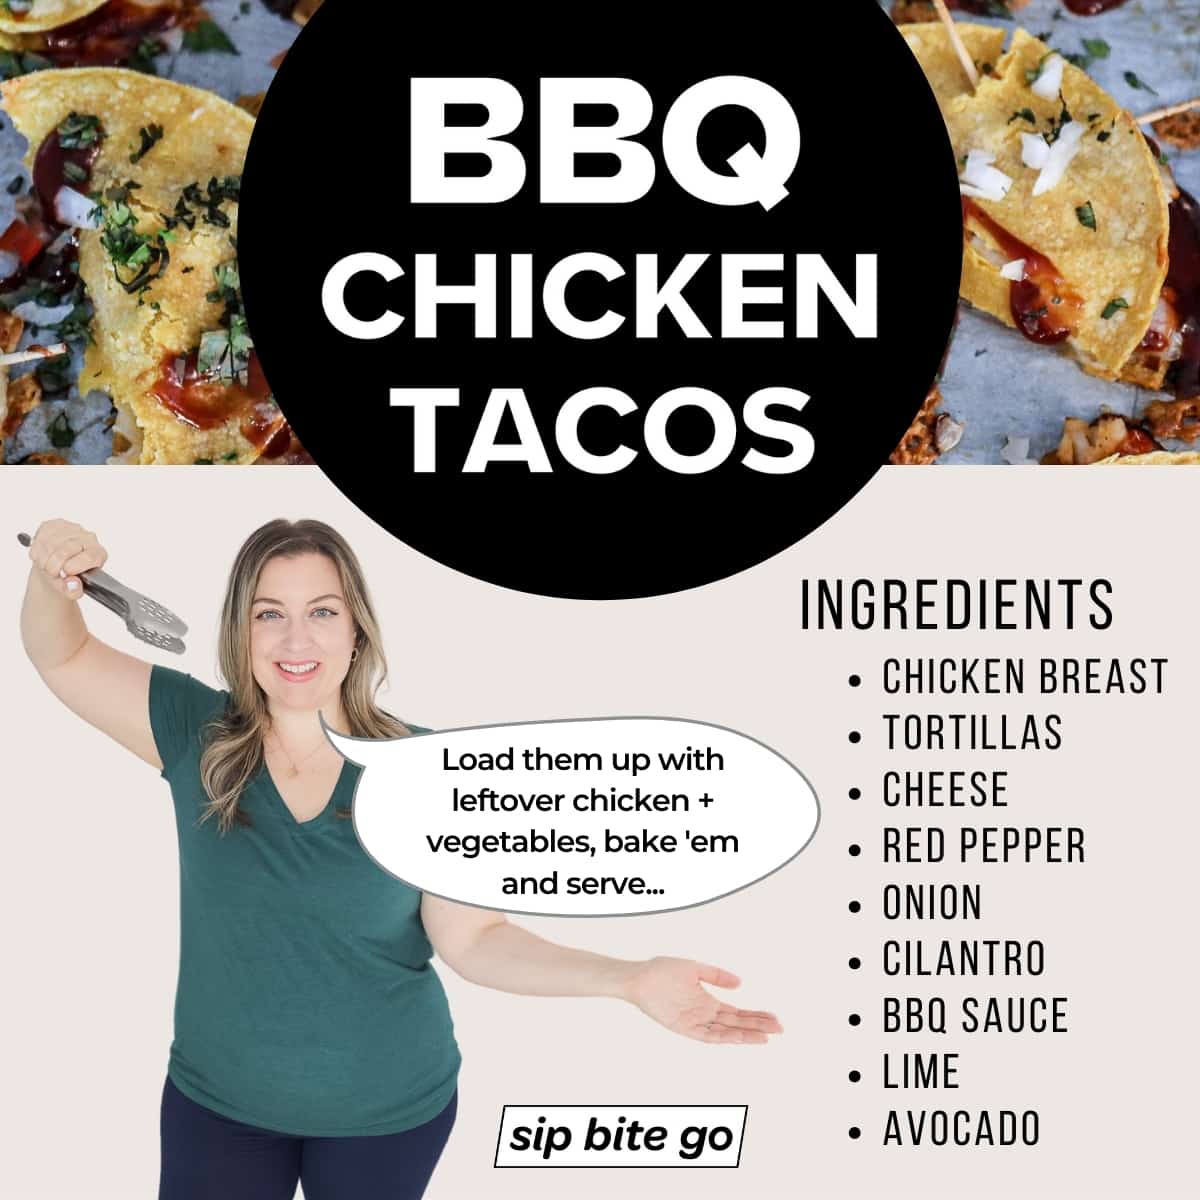 Ingredients list for Sheet Pan BBQ Chicken Tacos recipe